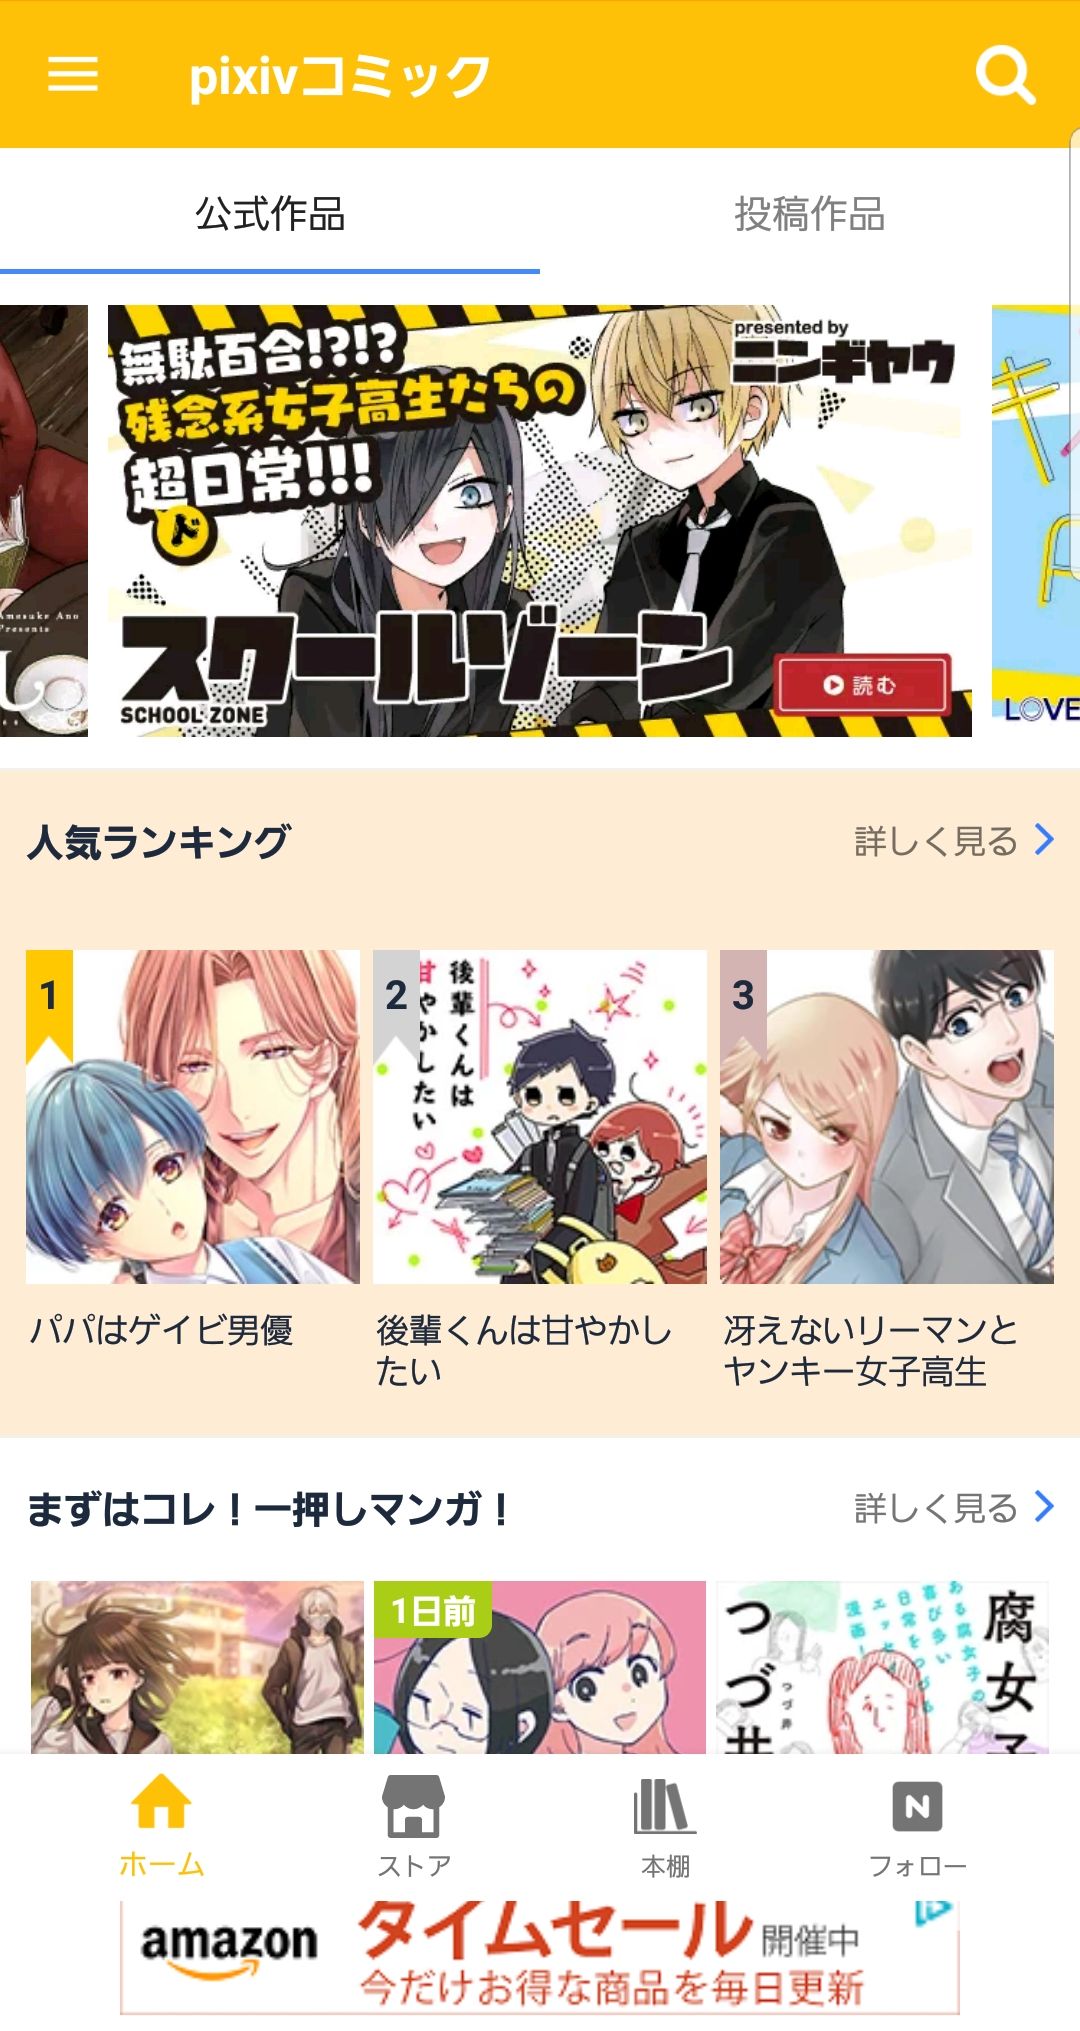 Manga App Pixiv Comic Which Can Read 179 Comic Magazines And 5 5